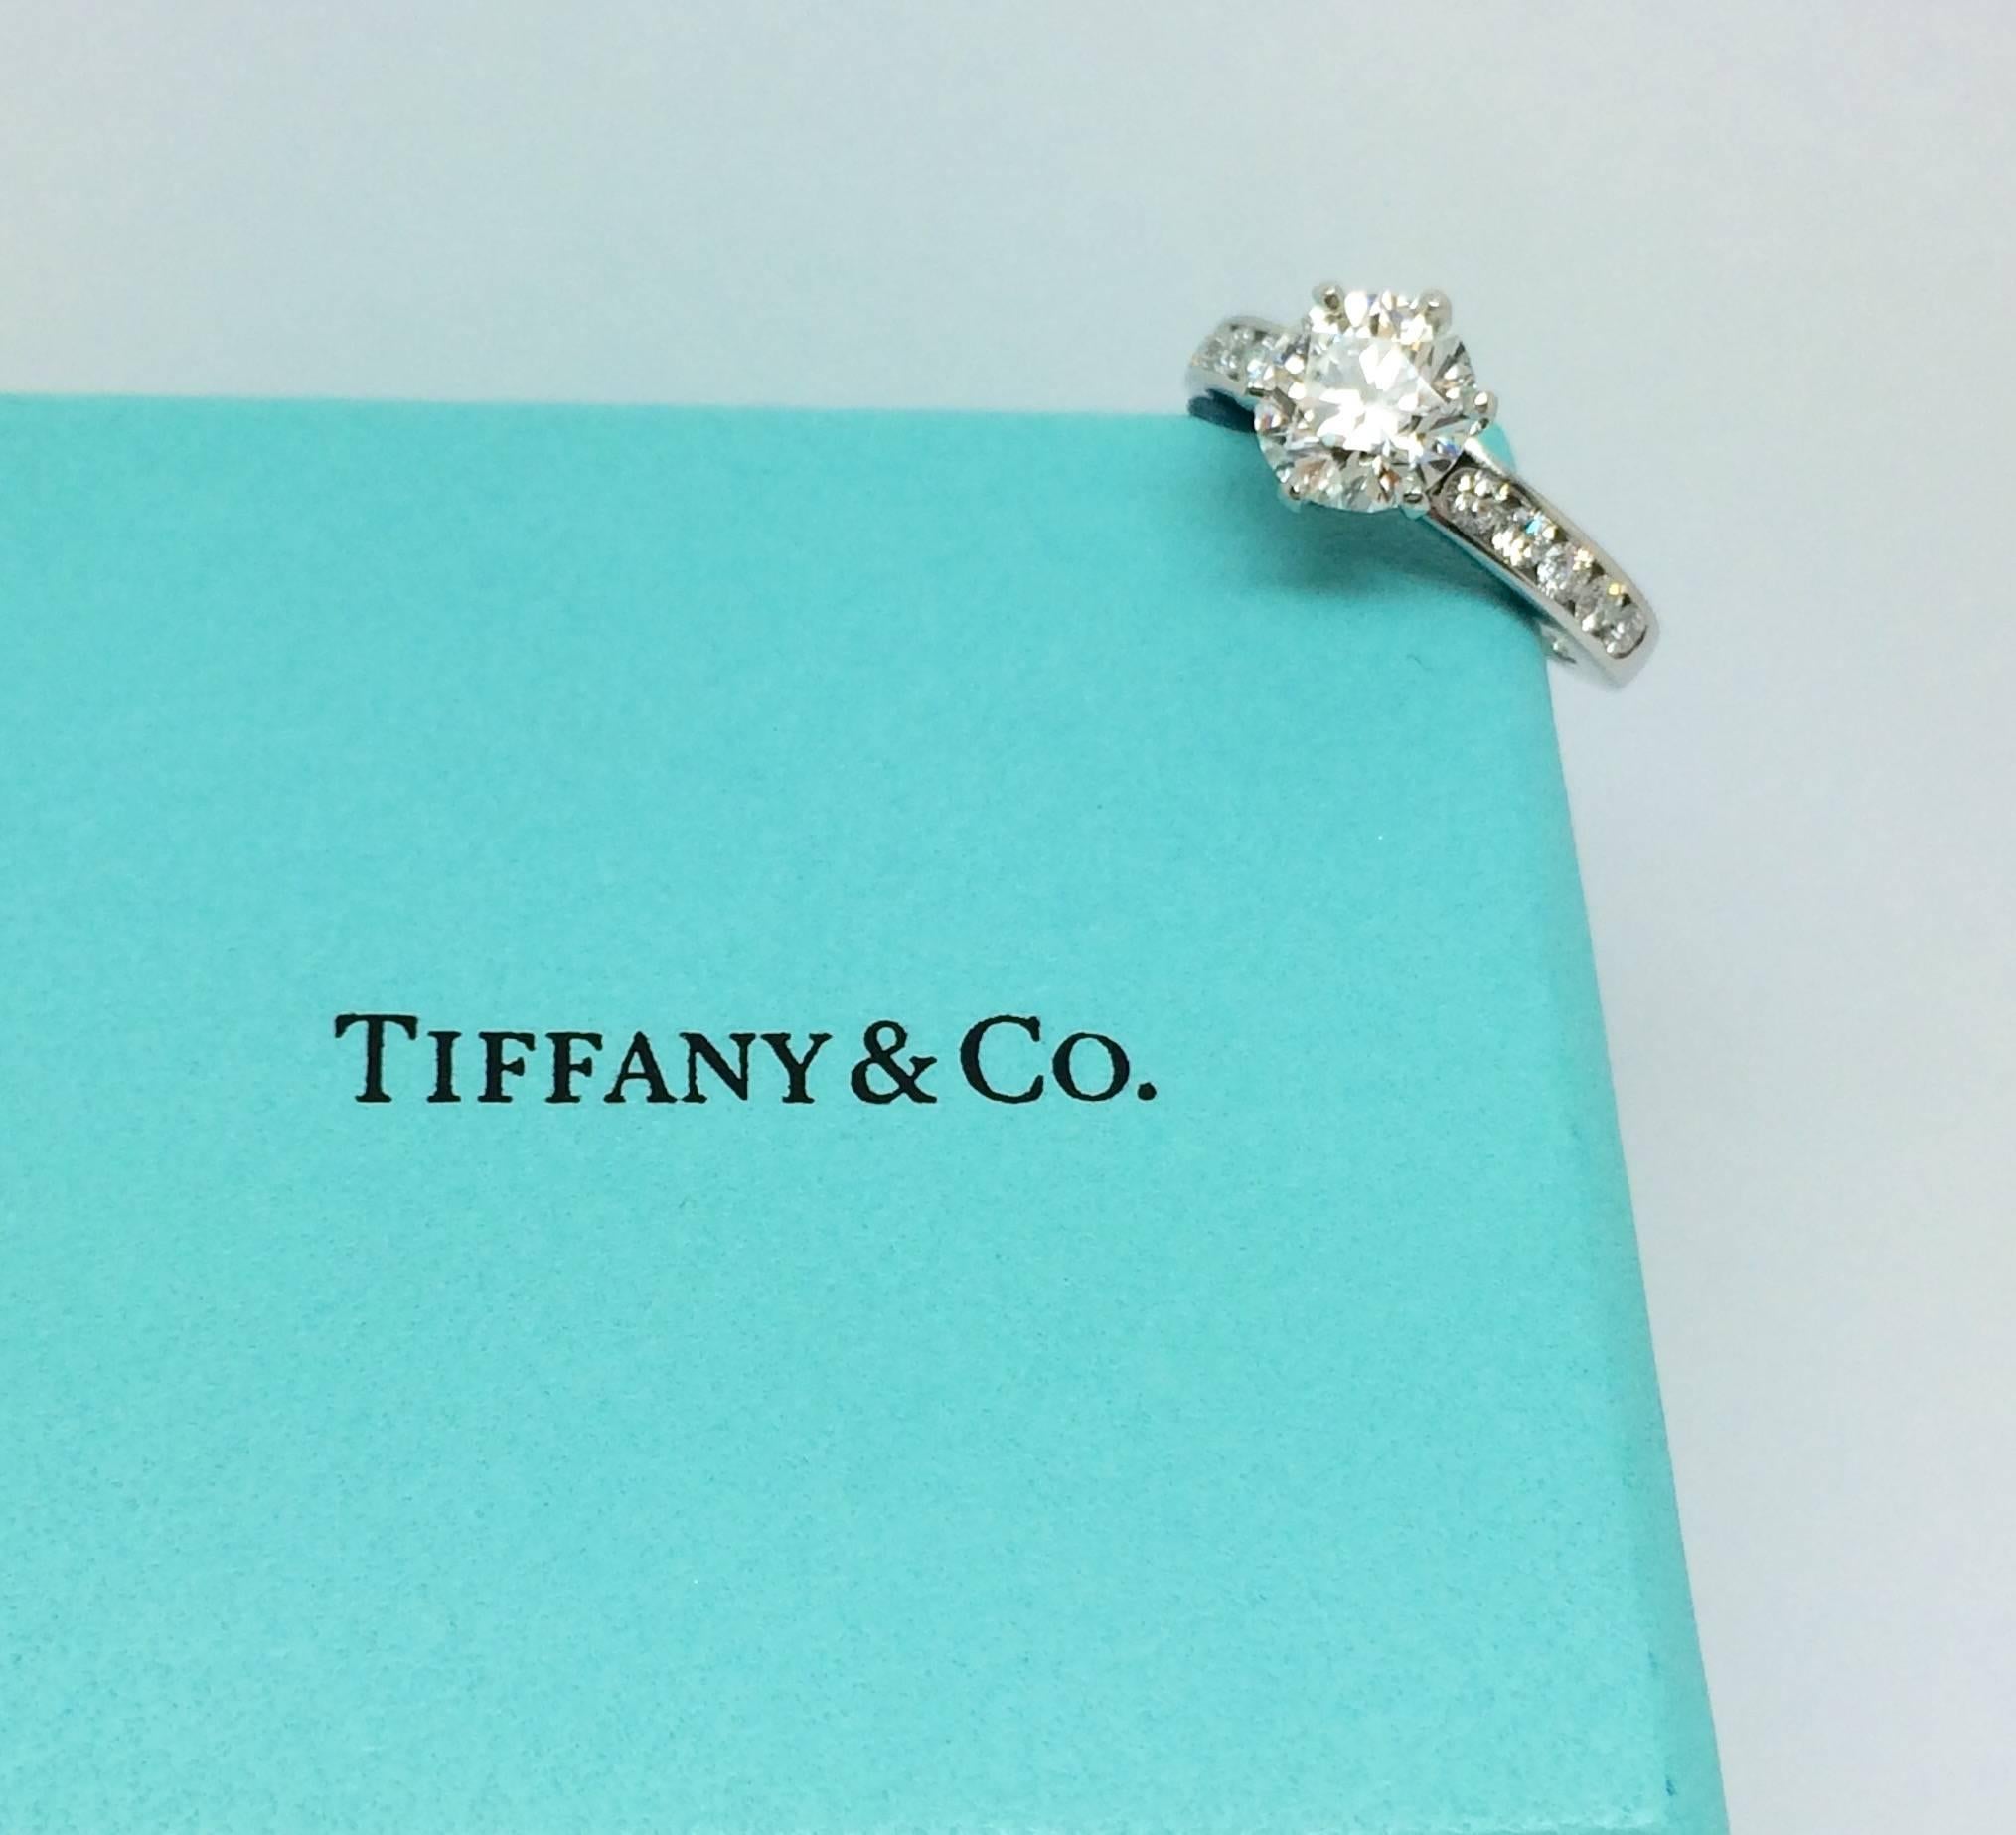 This stunning and timelessly classic Tiffany & Co. diamond engagement ring features a center round brilliant cut diamond 1.57 Carat / VS1 / H / Excellent Cut. The diamonds are set in a platinum ring mount with shoulder diamonds  0.35 T.W  VS1 / GH/